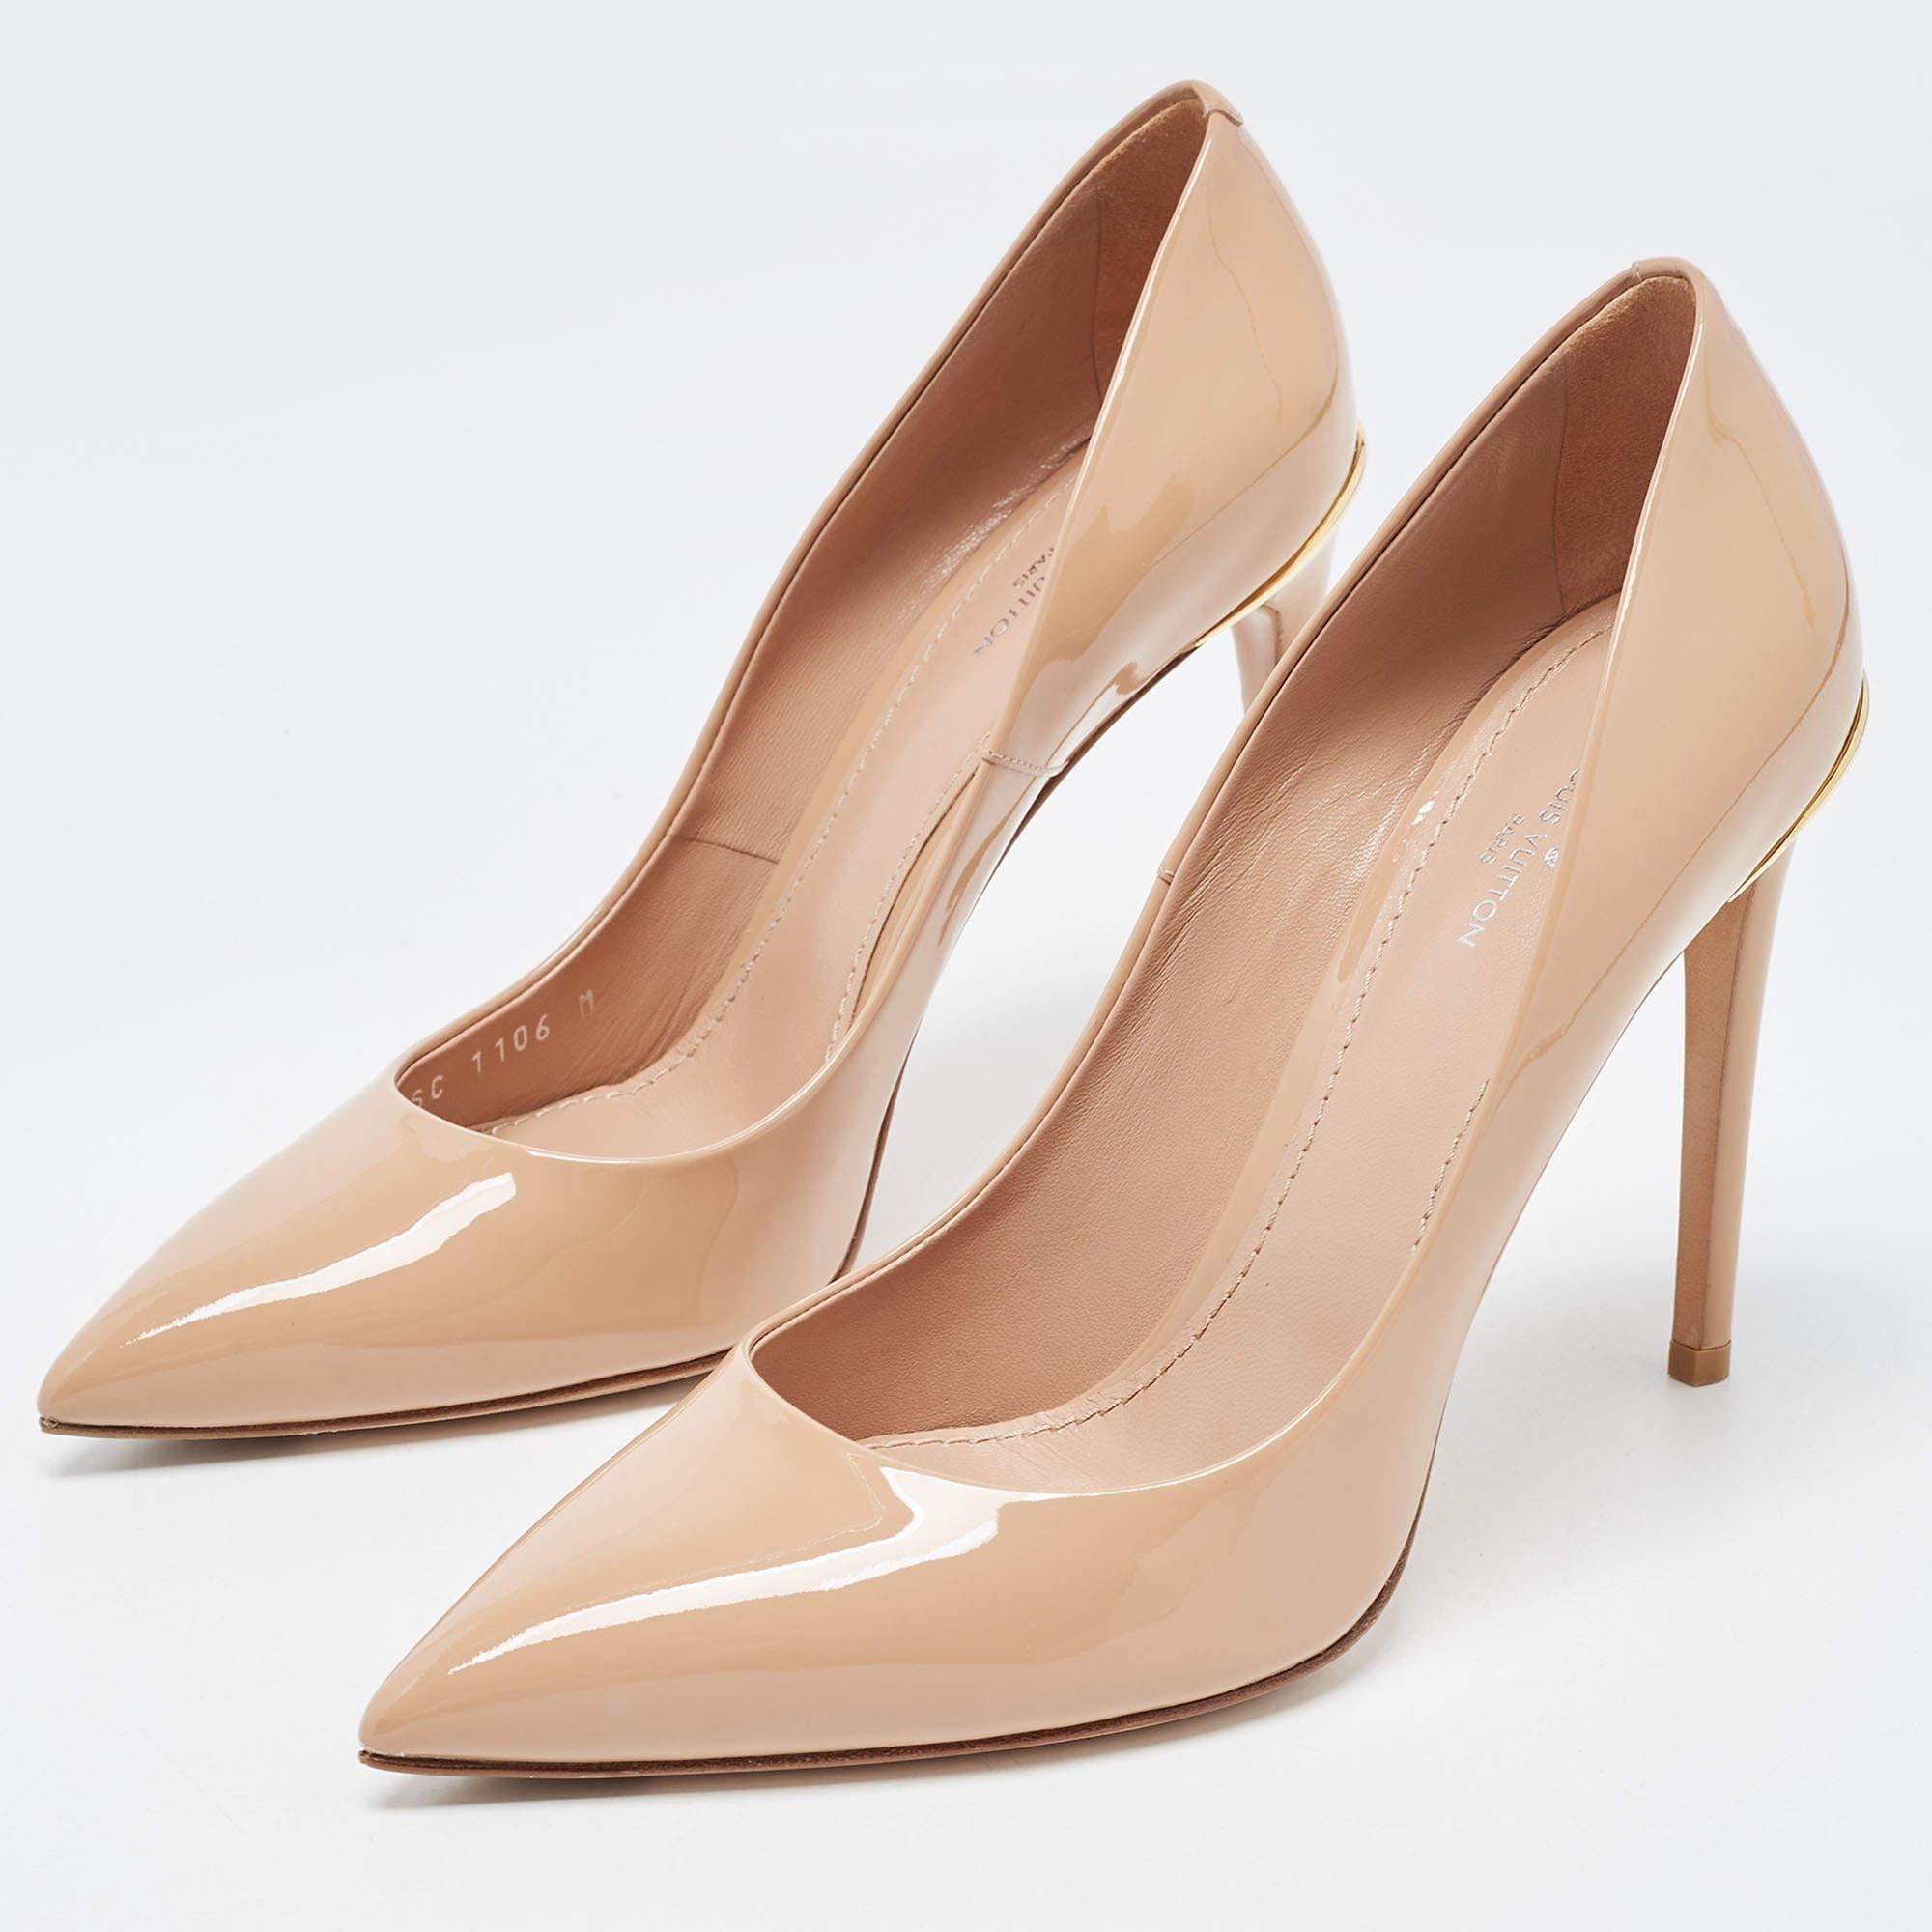 Louis Vuitton Beige Patent Leather Eyeline Pointed Toe Pumps Size 38.5 4